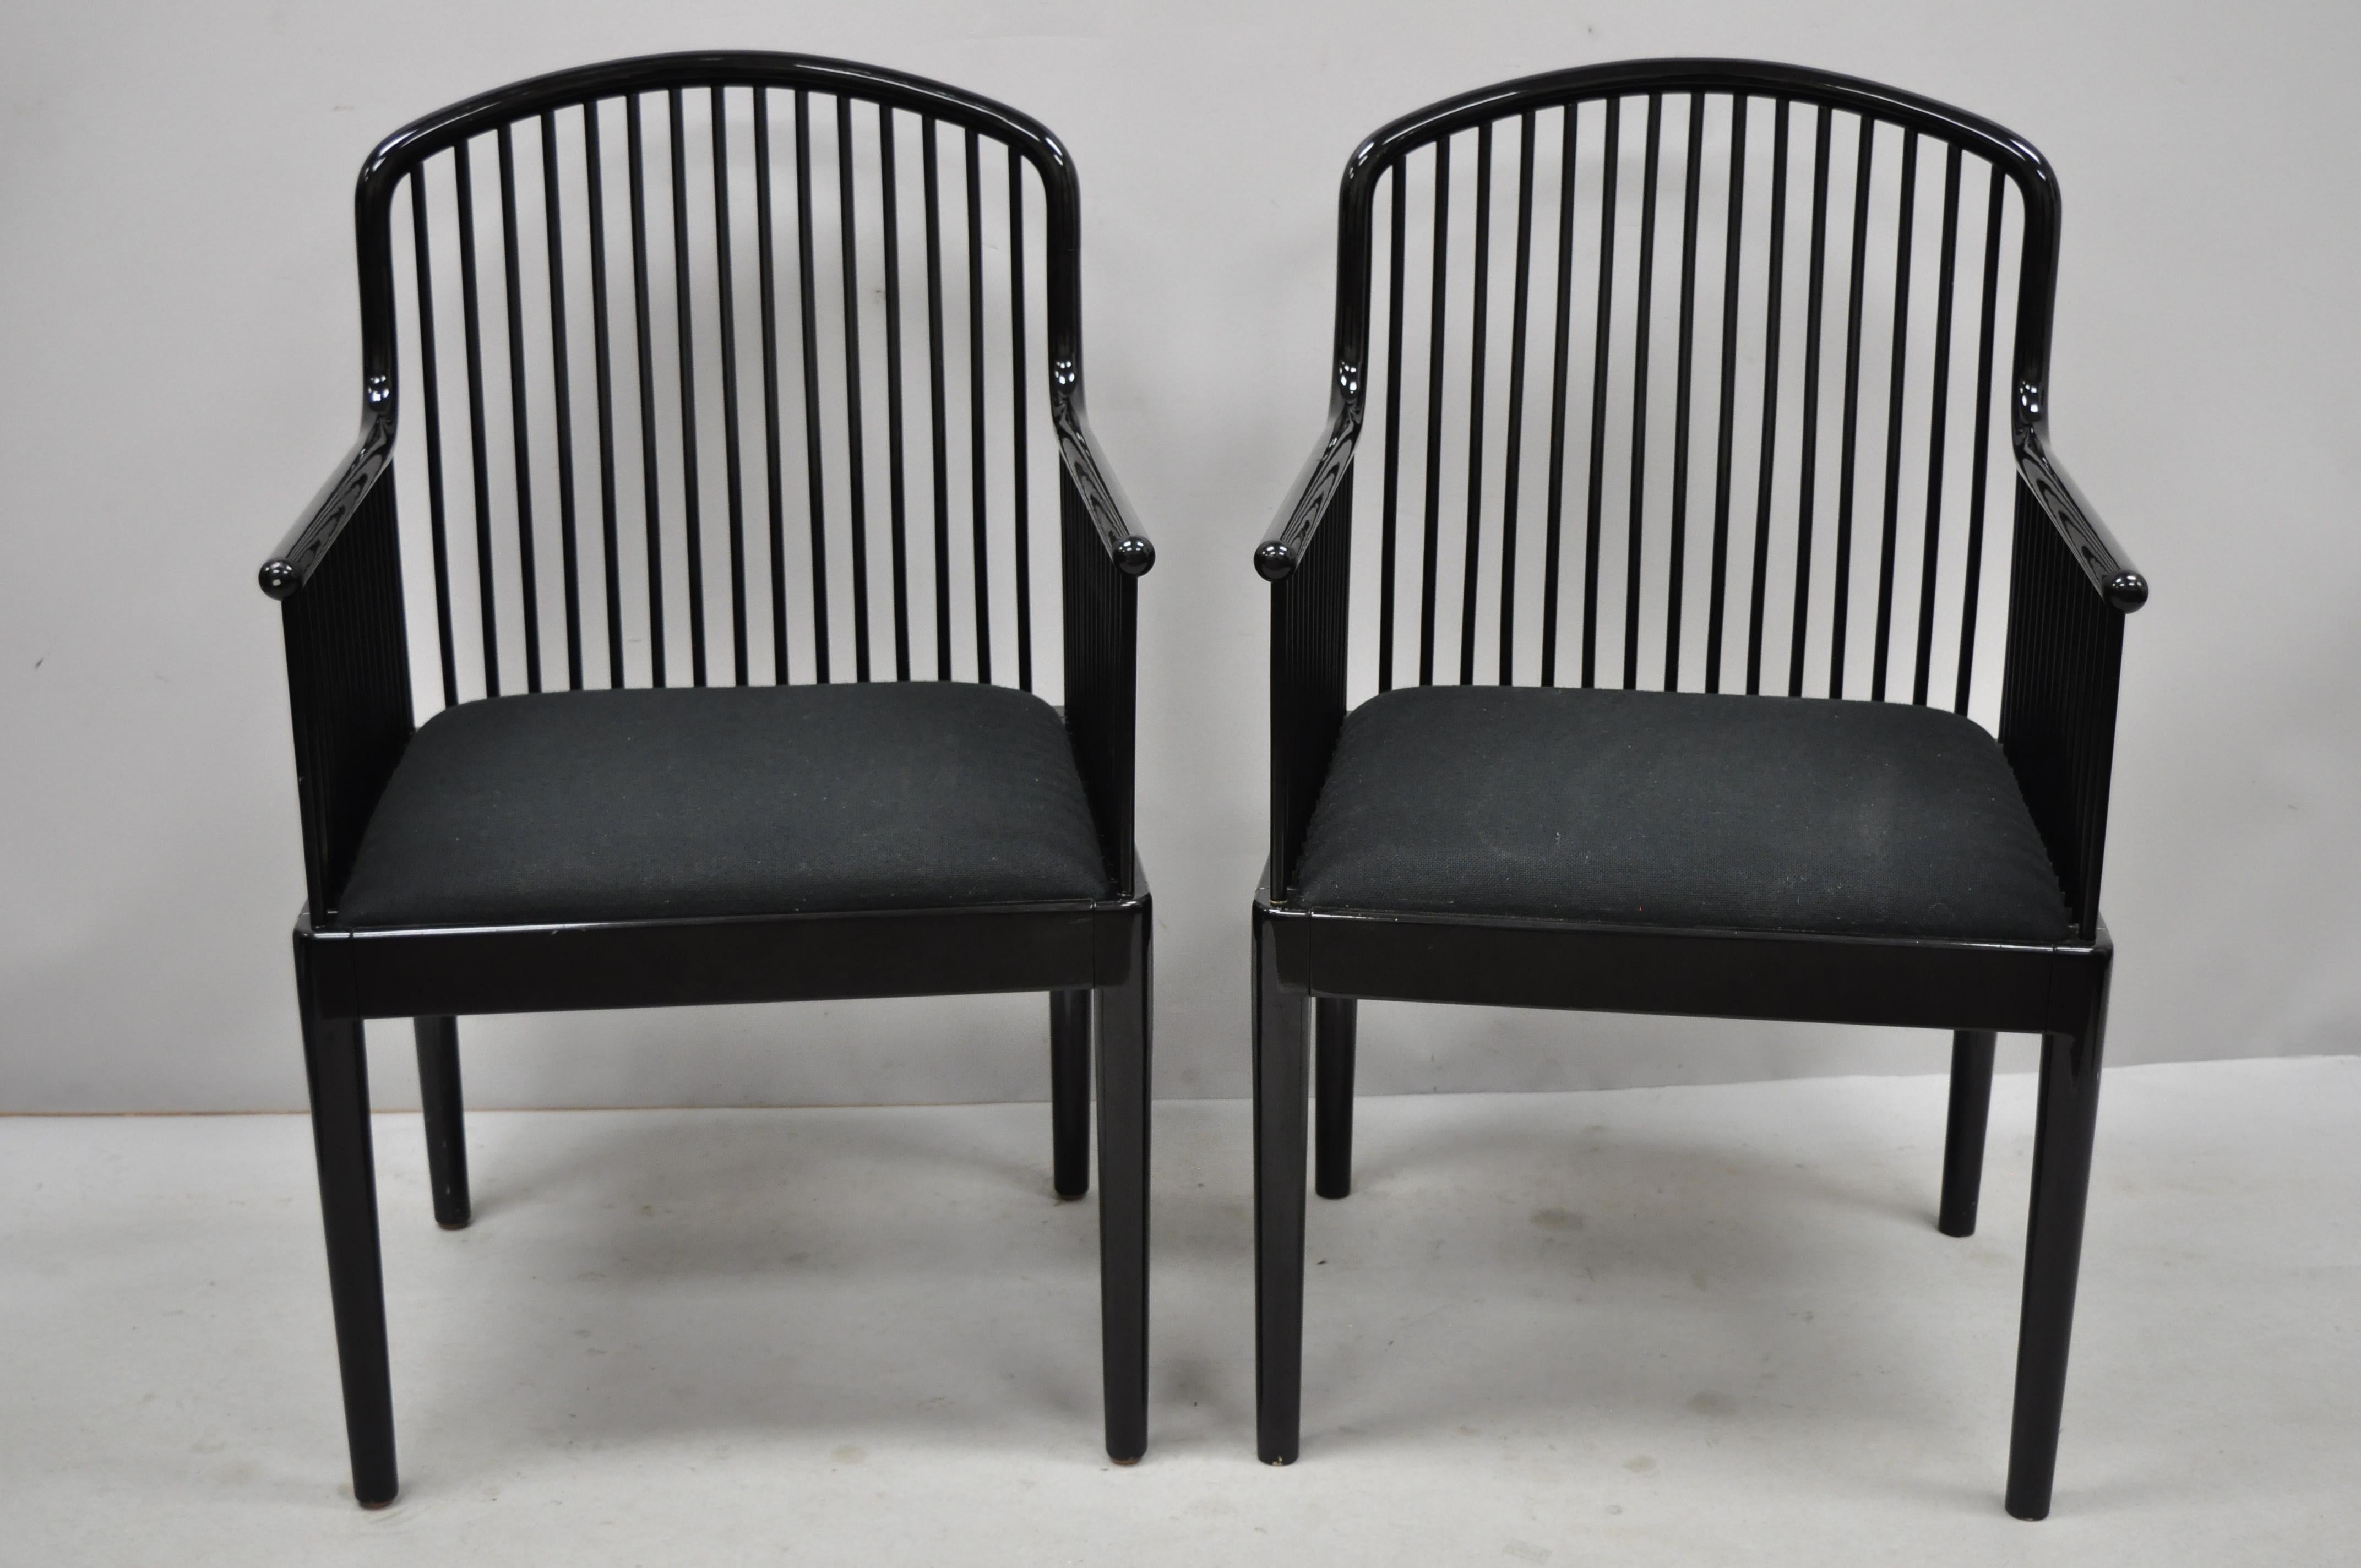 Pair of black lacquer modern Andover armchairs by Davis Allen for Stendig (A). Item includes a black lacquer finish, solid wood frame, original label, very nice vintage item, clean modernist lines, circa late 20th century. Measurements: 36.5